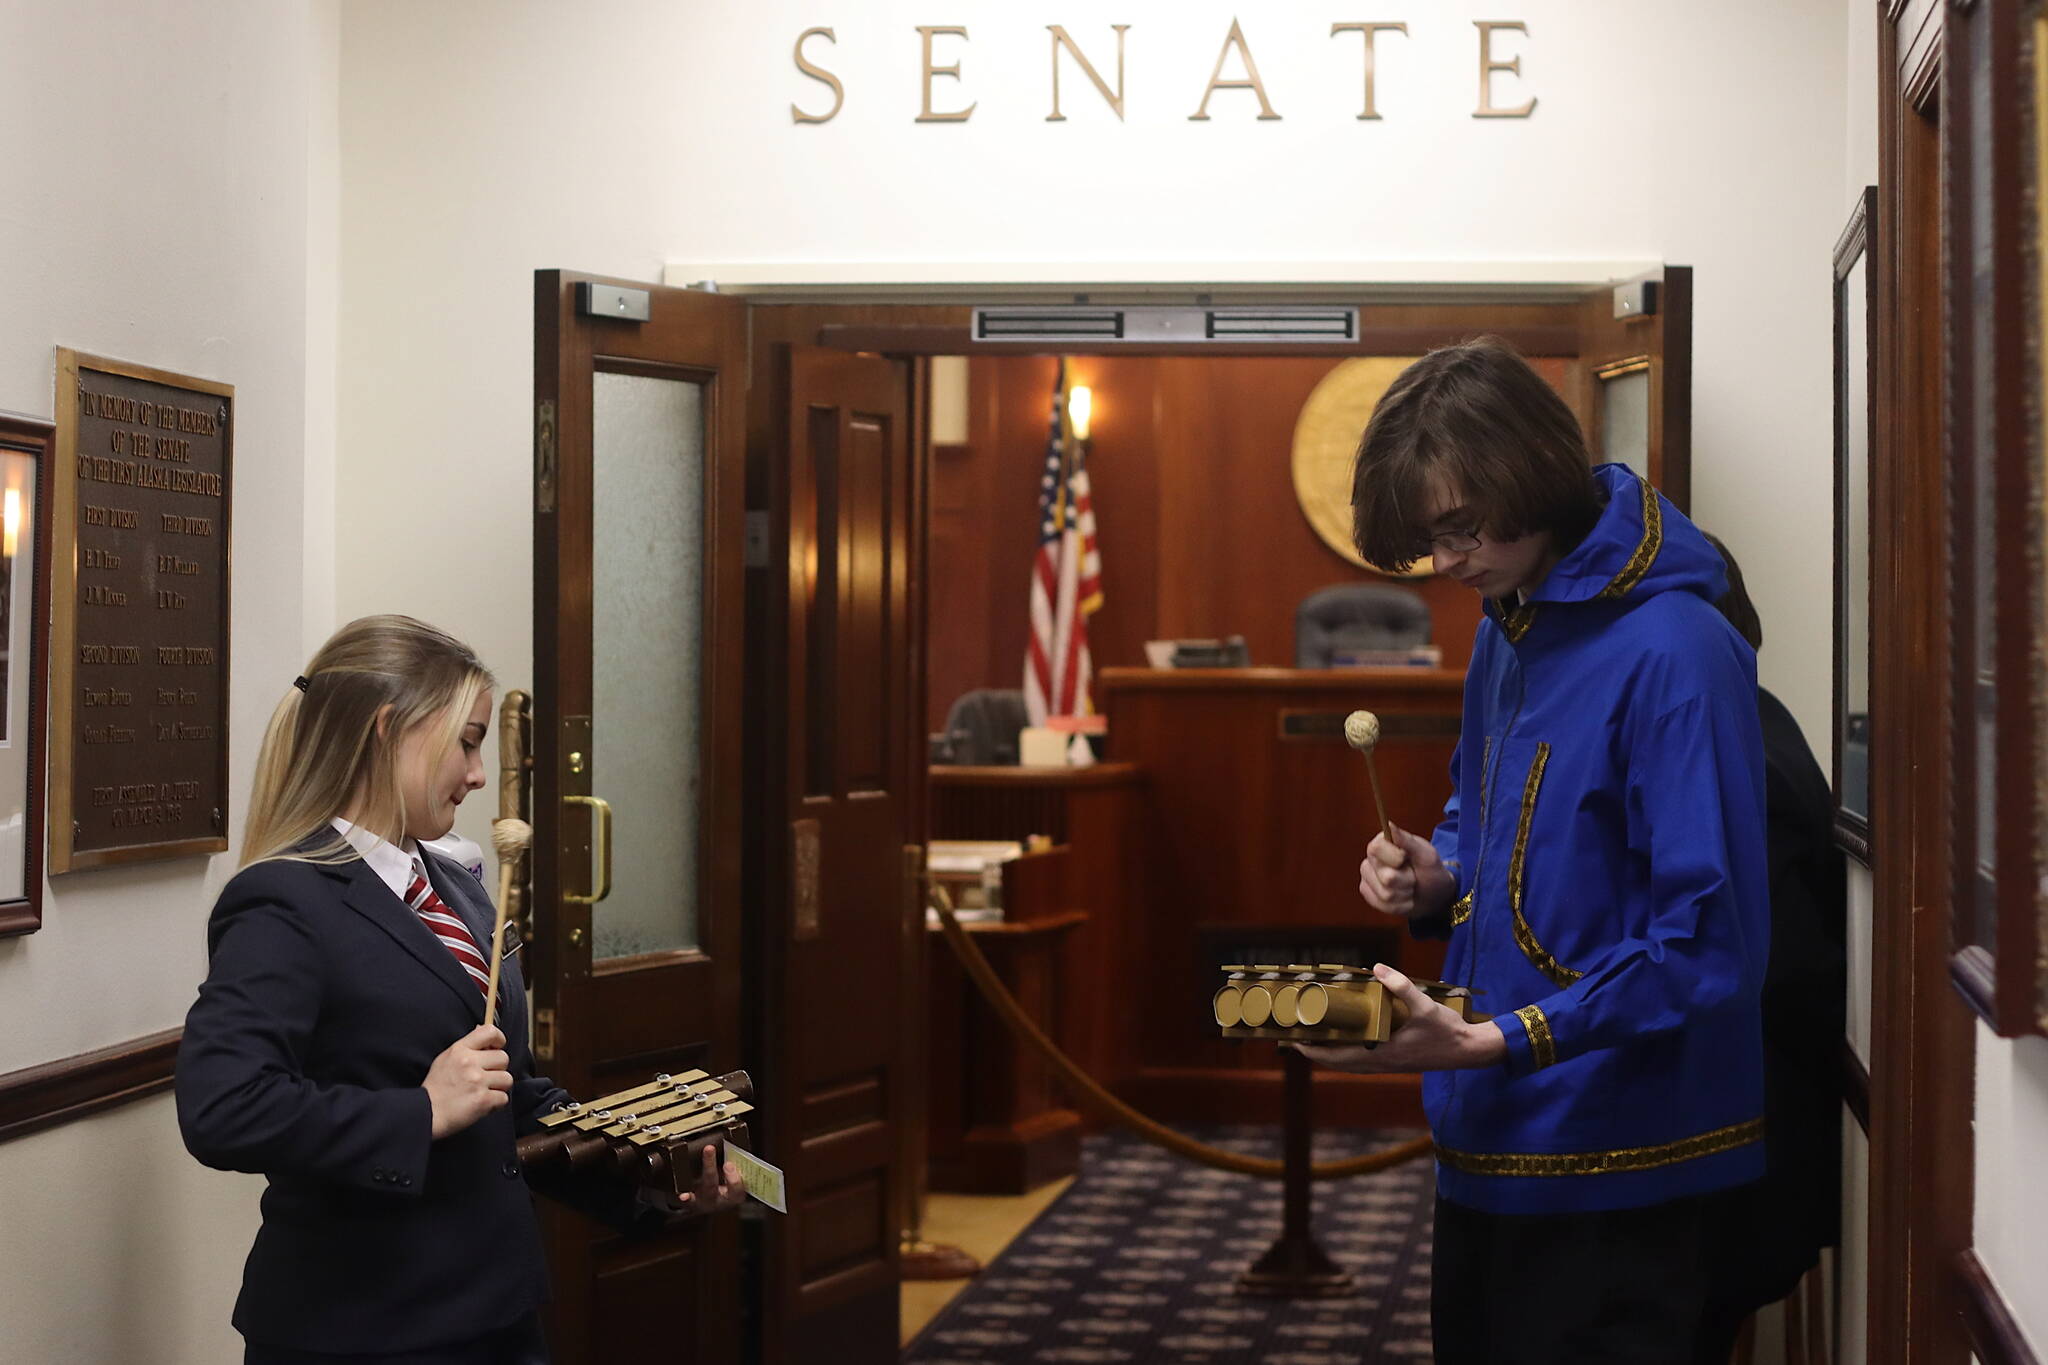 Senate pages Jenna Carpenter and Bernard Damerval play “Off To The Races” outside the Senate Chambers exactly 15 minutes before the start of the floor session. Pages then perform the tones alerting senators the session is about to start on all floors of the Capitol where the legislators have offices. The House relies on an electronic bell notification that plays the famous clock chime “Westminster Quarters.” (Mark Sabbatini / Juneau Empire)